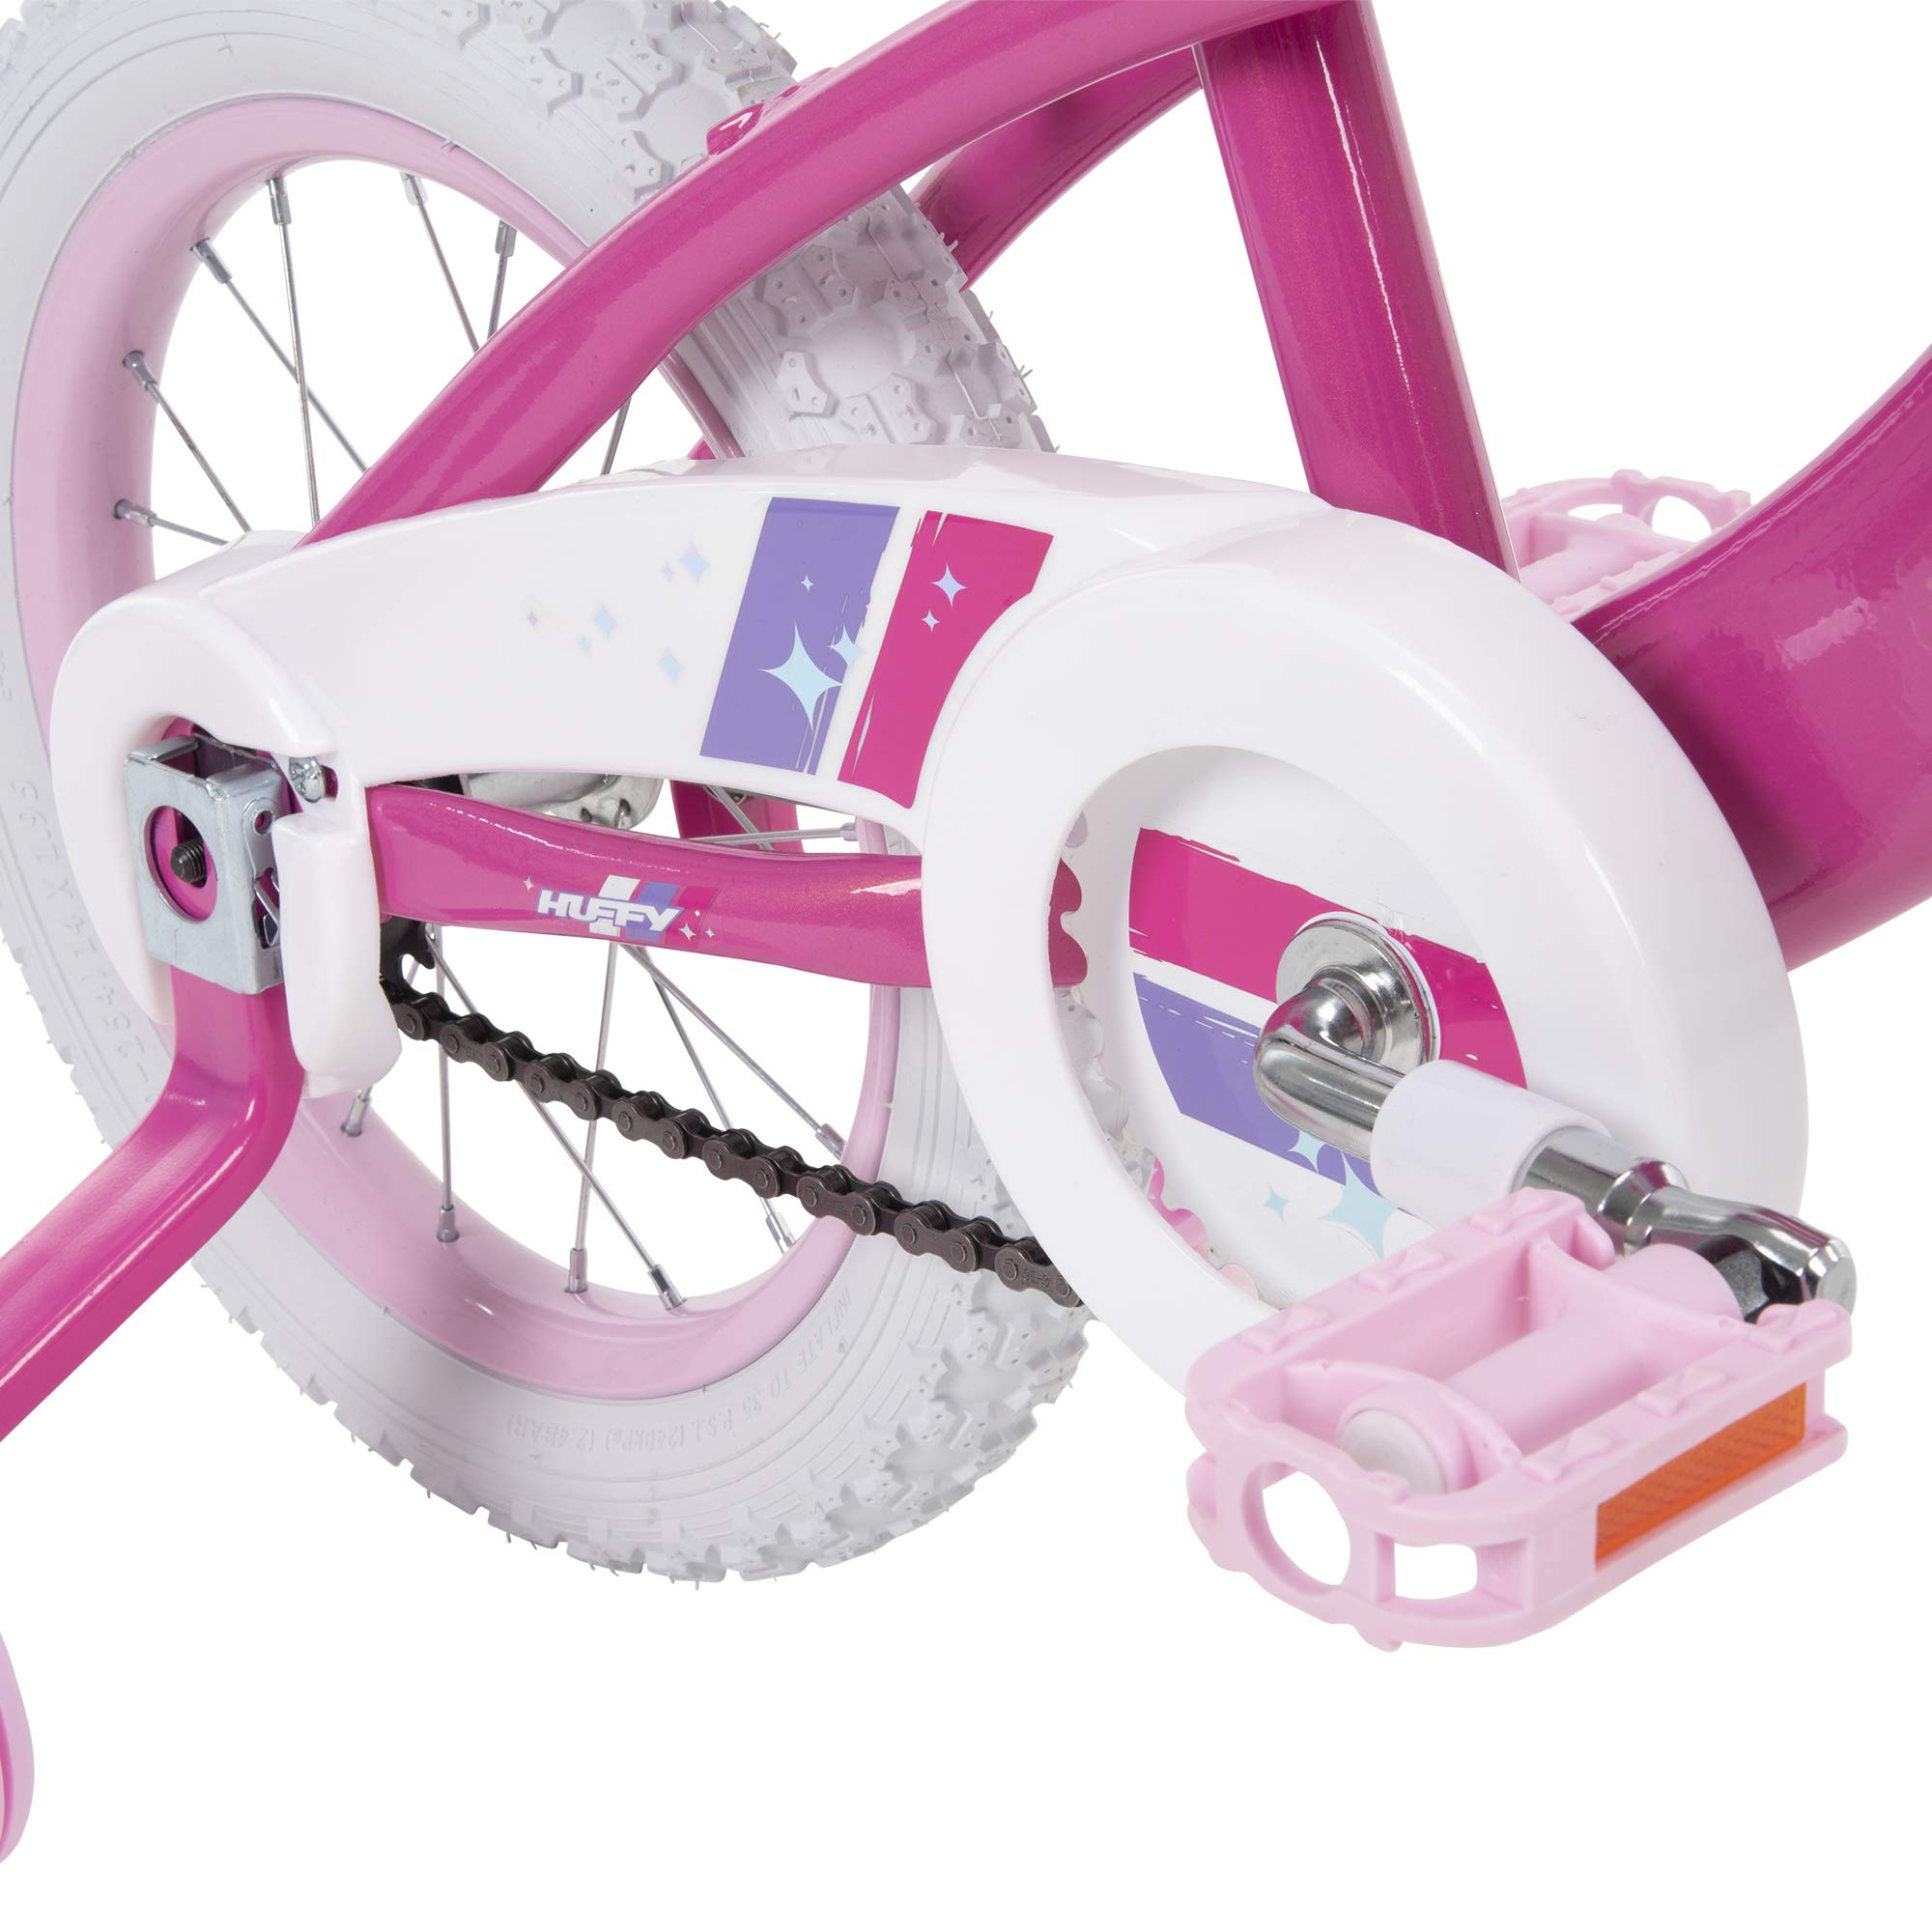 Huffy Glimmer 14” Girl’s Bike with Training Wheels, Quick Connect Assembly, Pink